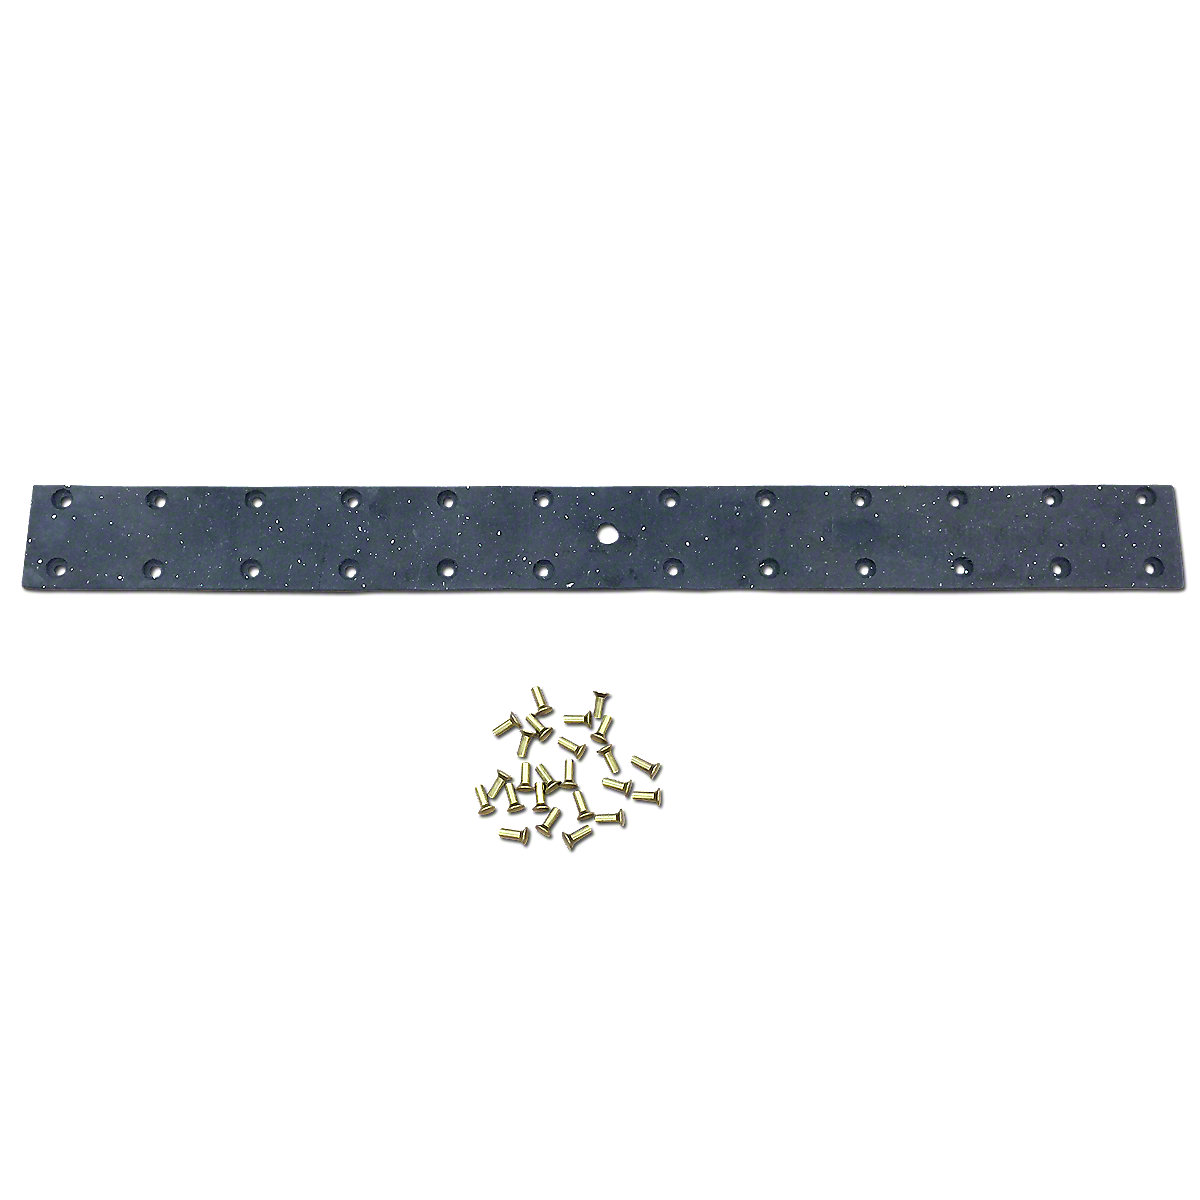 UCA50138   Brake Lining Kit with Rivets---Replaces VTA3459